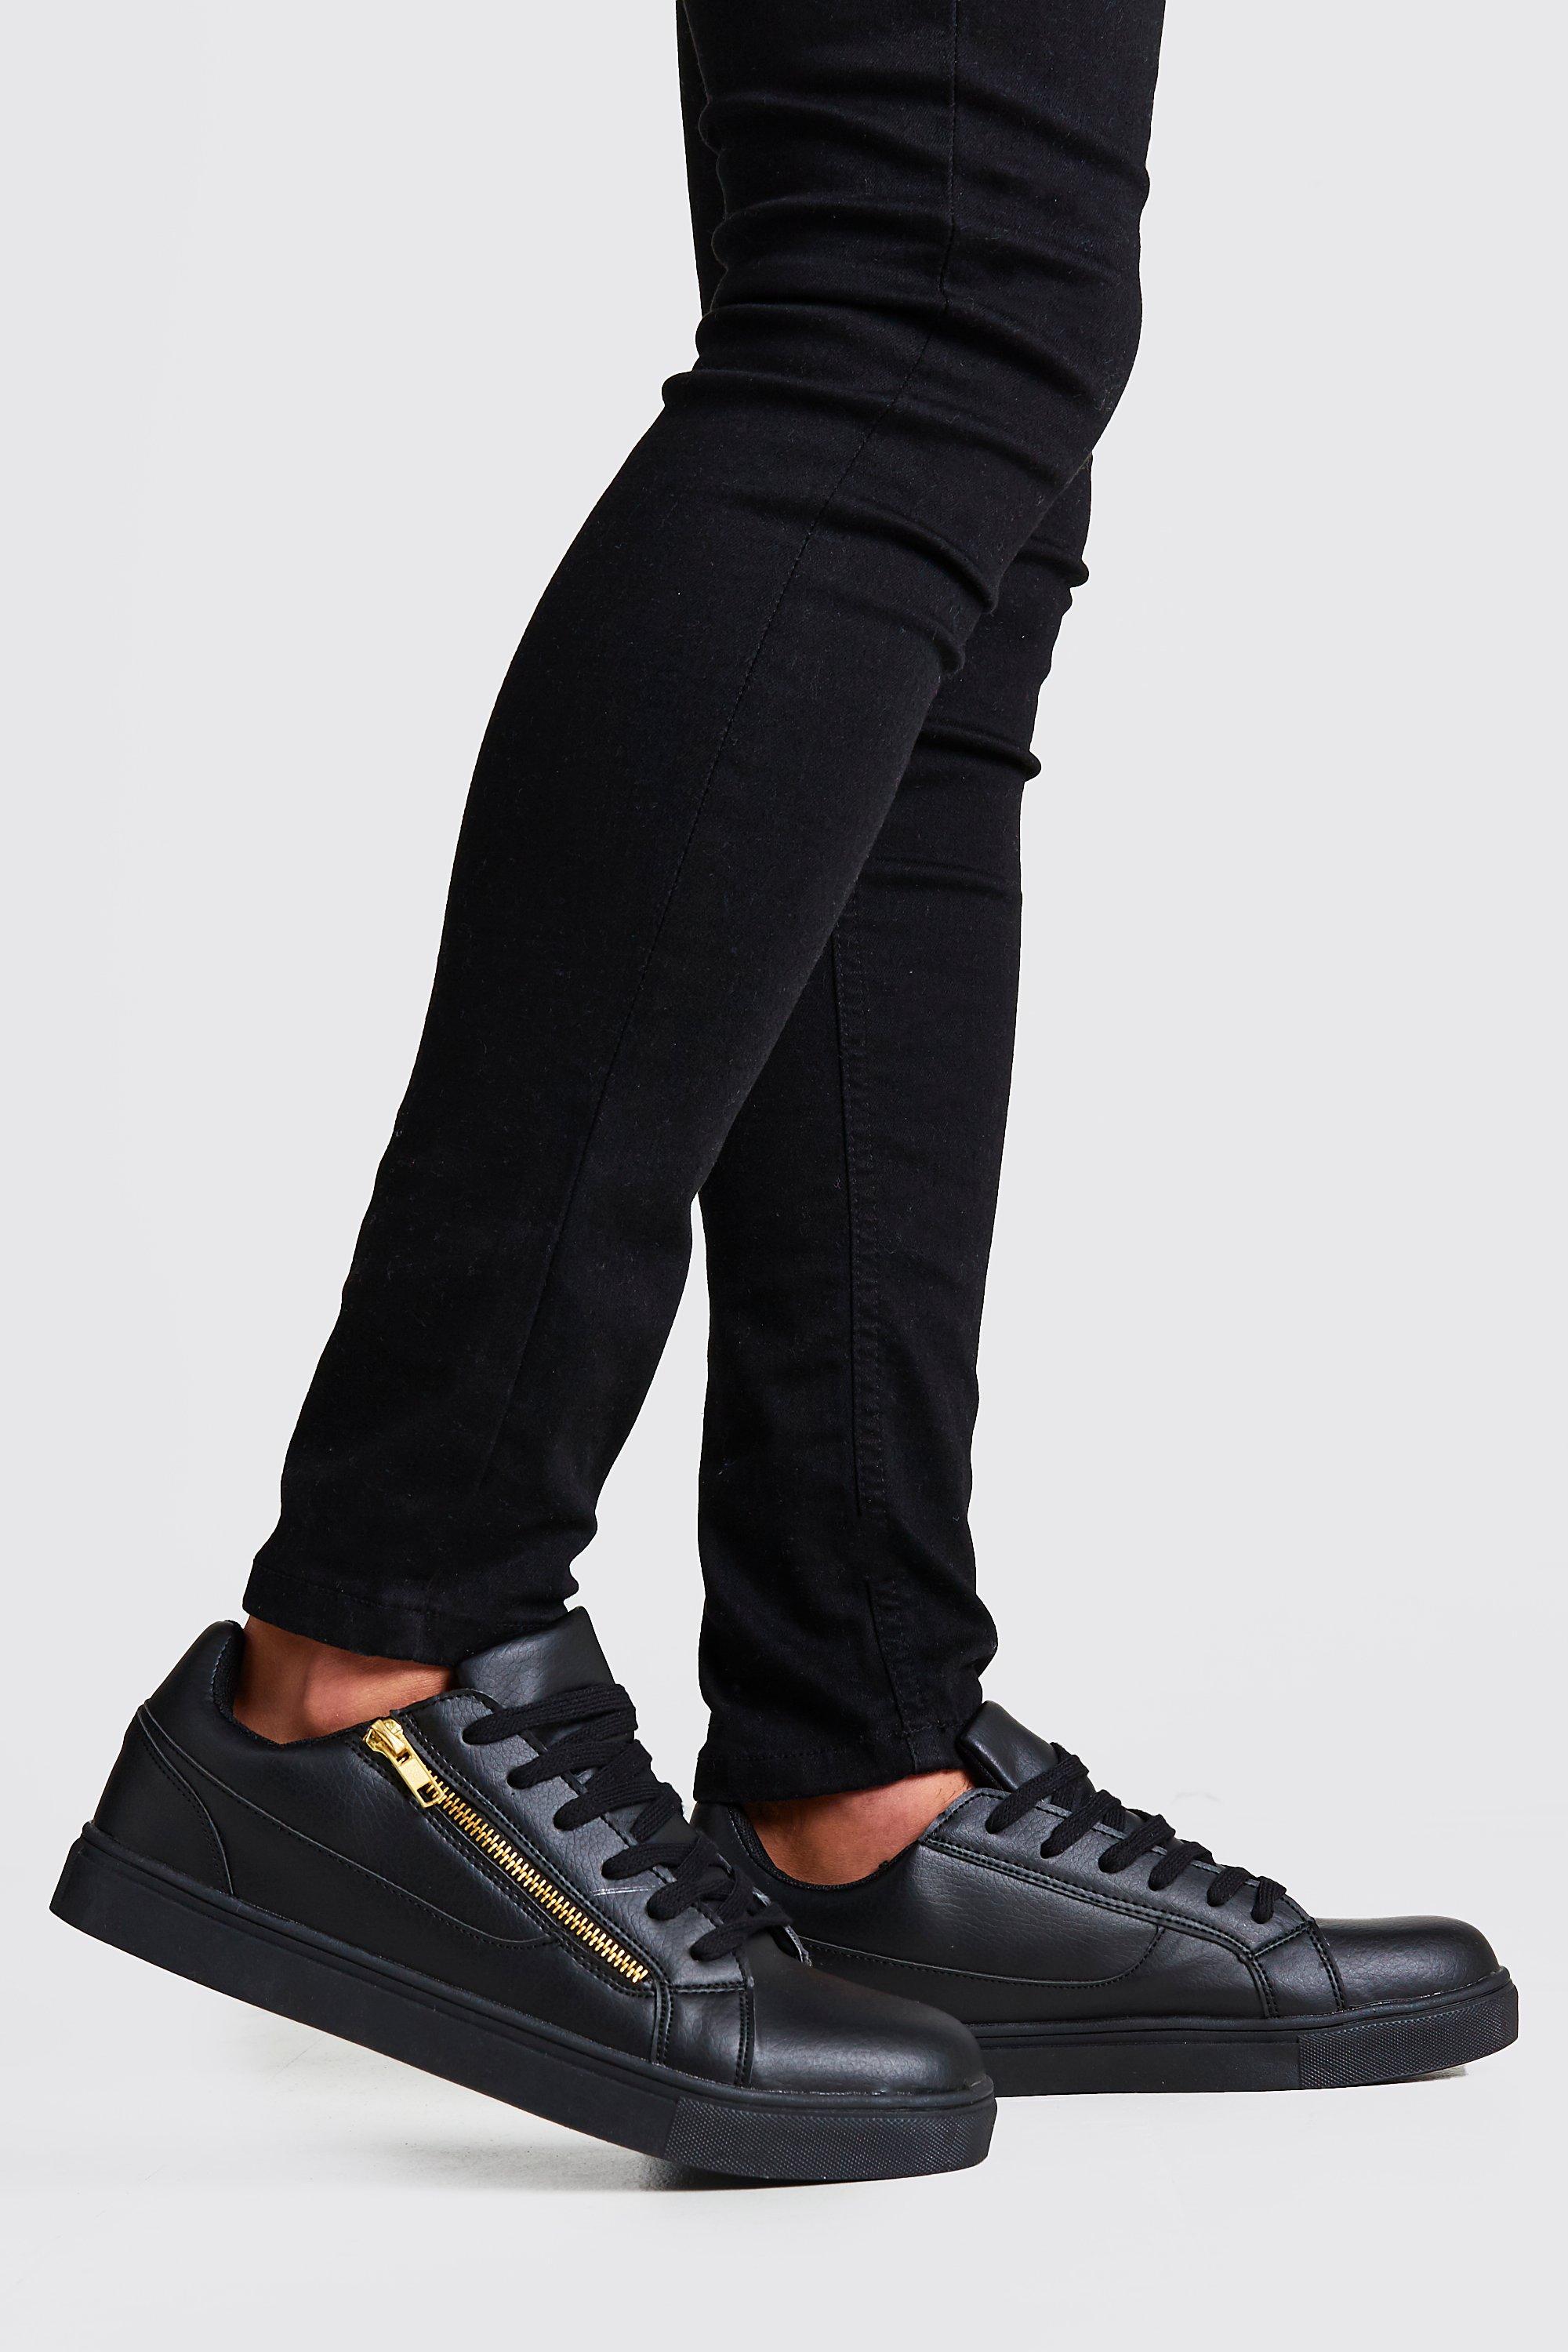 Gnide Amerika Transistor Faux Leather Gold Zip Sneakers | boohooMAN USA